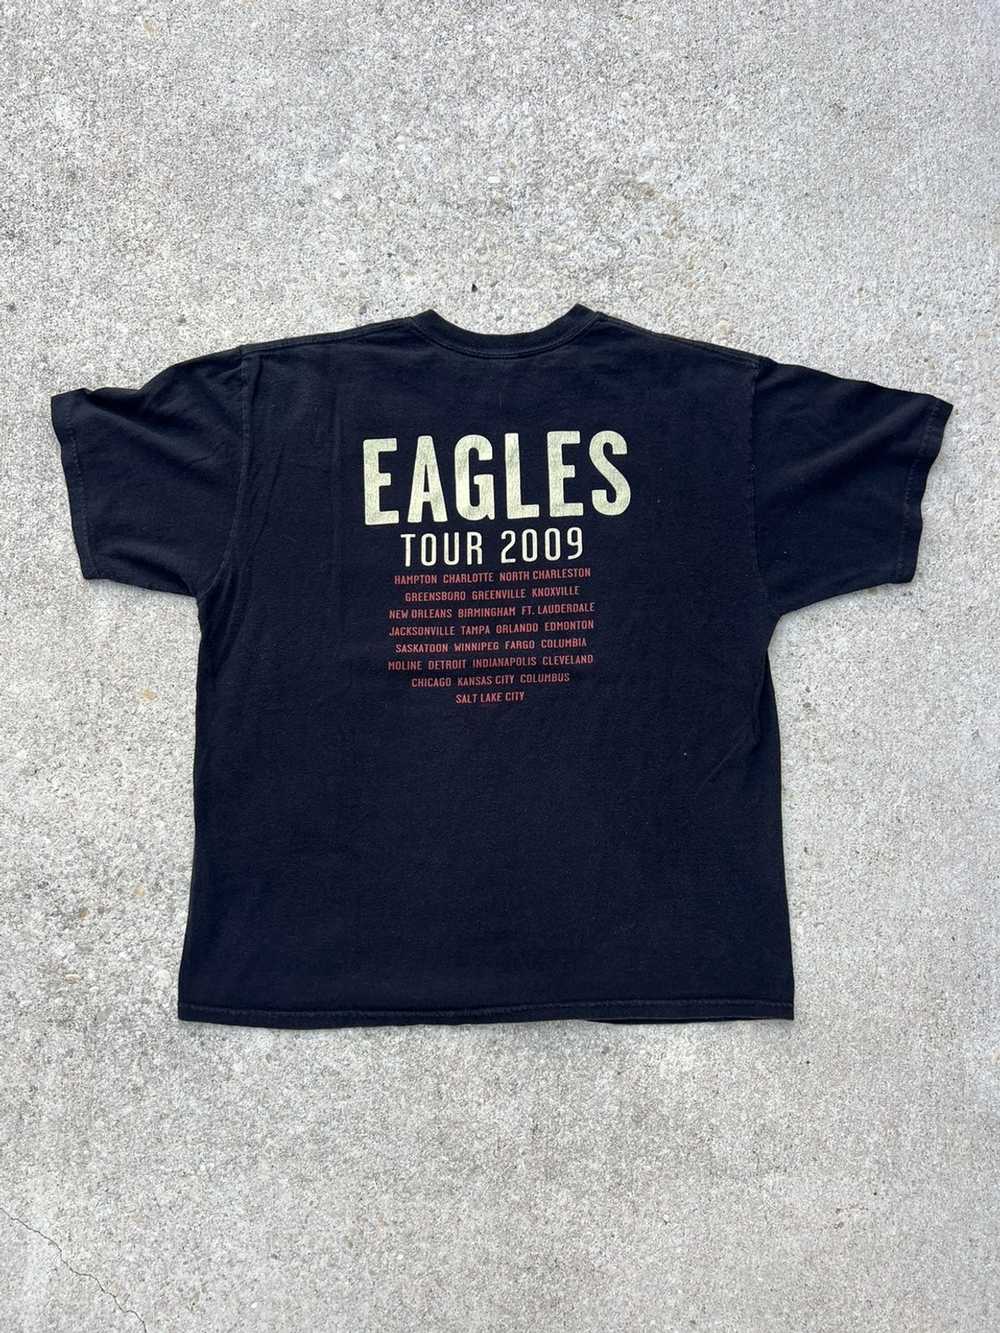 Band Tees × Vintage The Eagles Hotel California T… - image 3